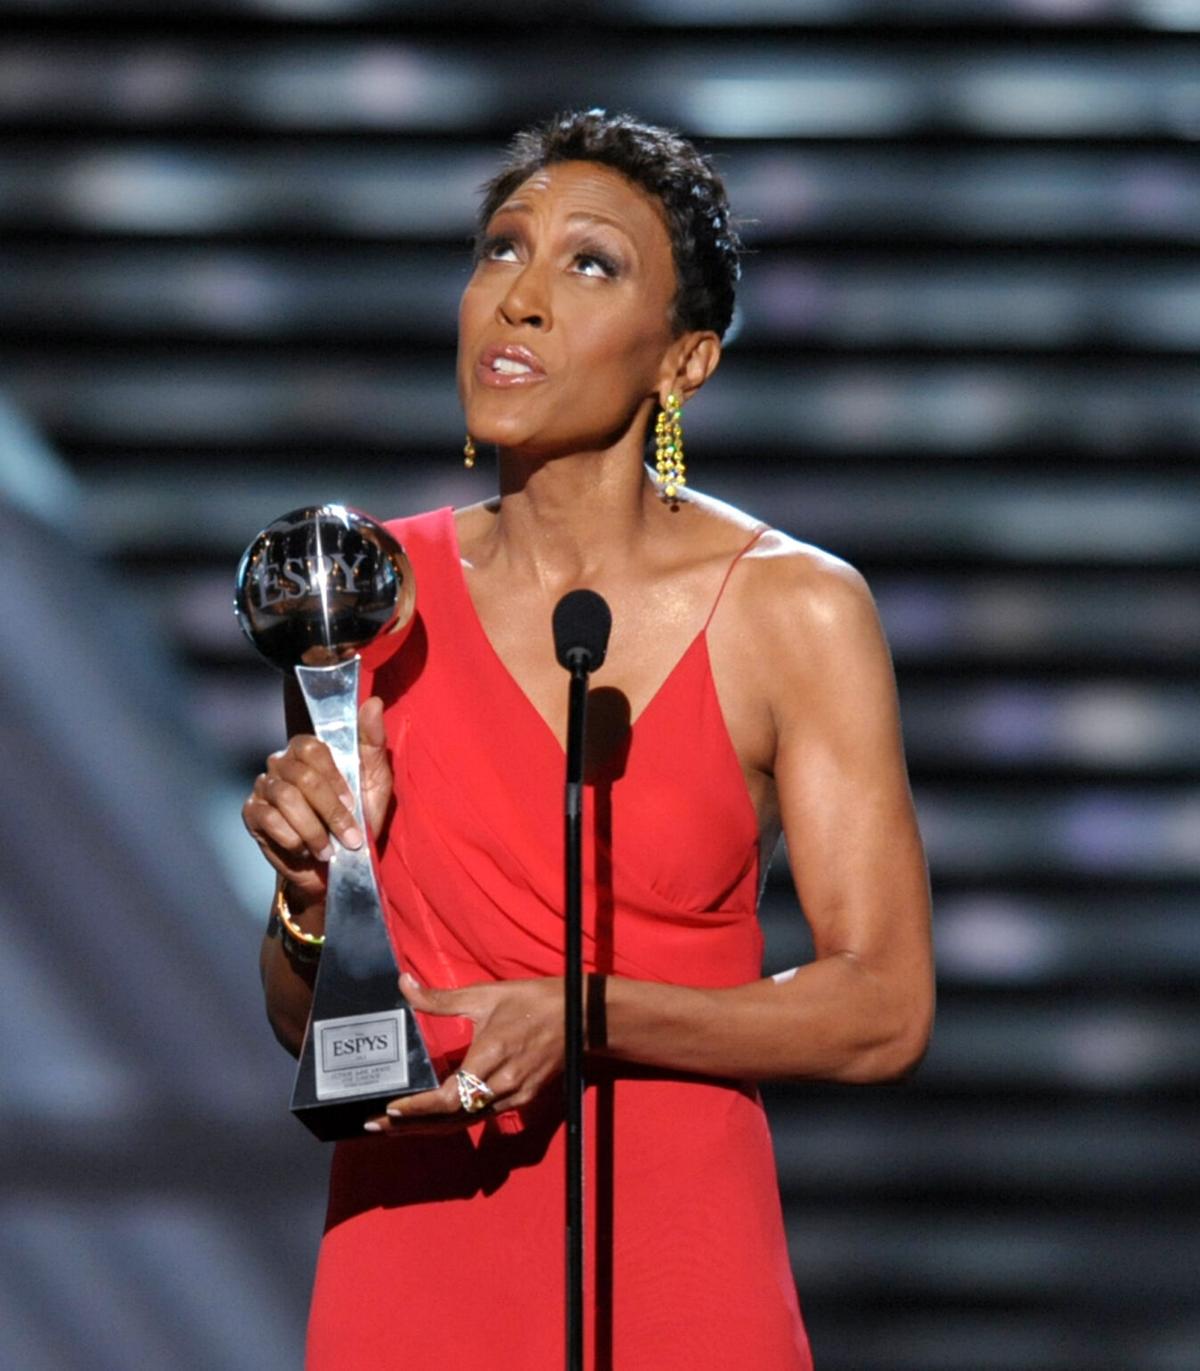 Robin Roberts turns 60 today. A look at some career highlights, in